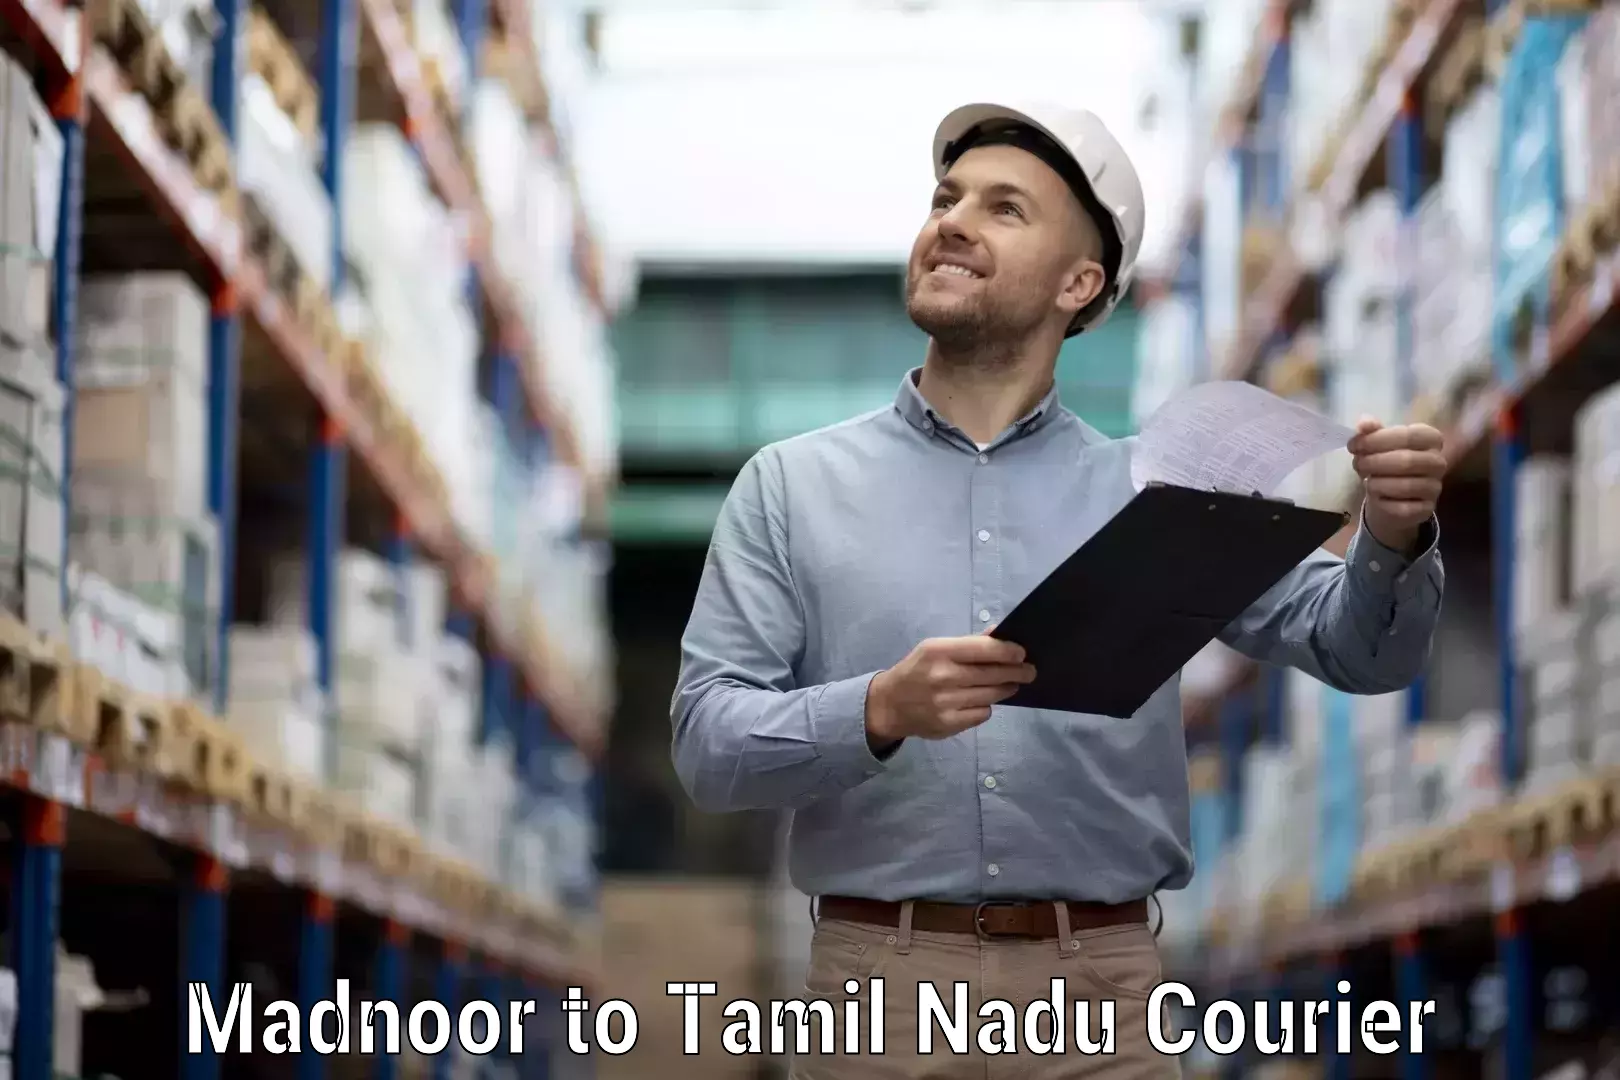 Courier service comparison Madnoor to Thondi